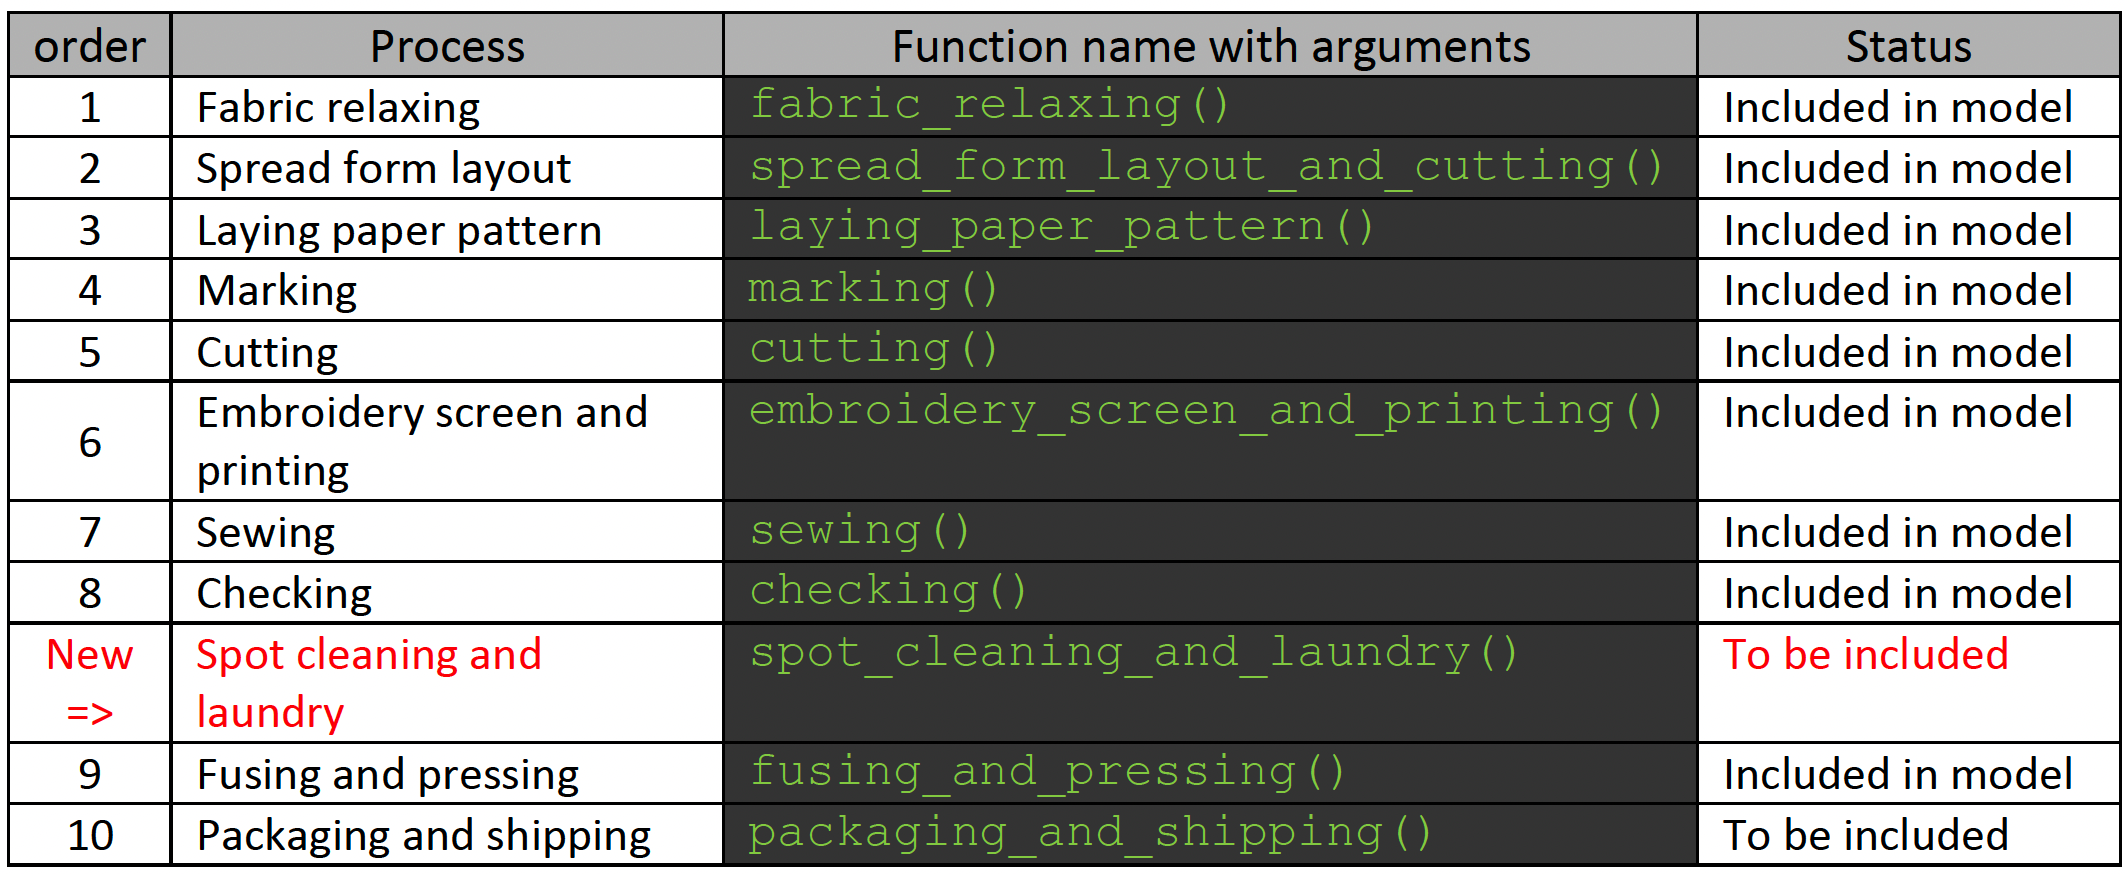 Table with process names, respective functions, and information about whether the process has been incorporated in the model.